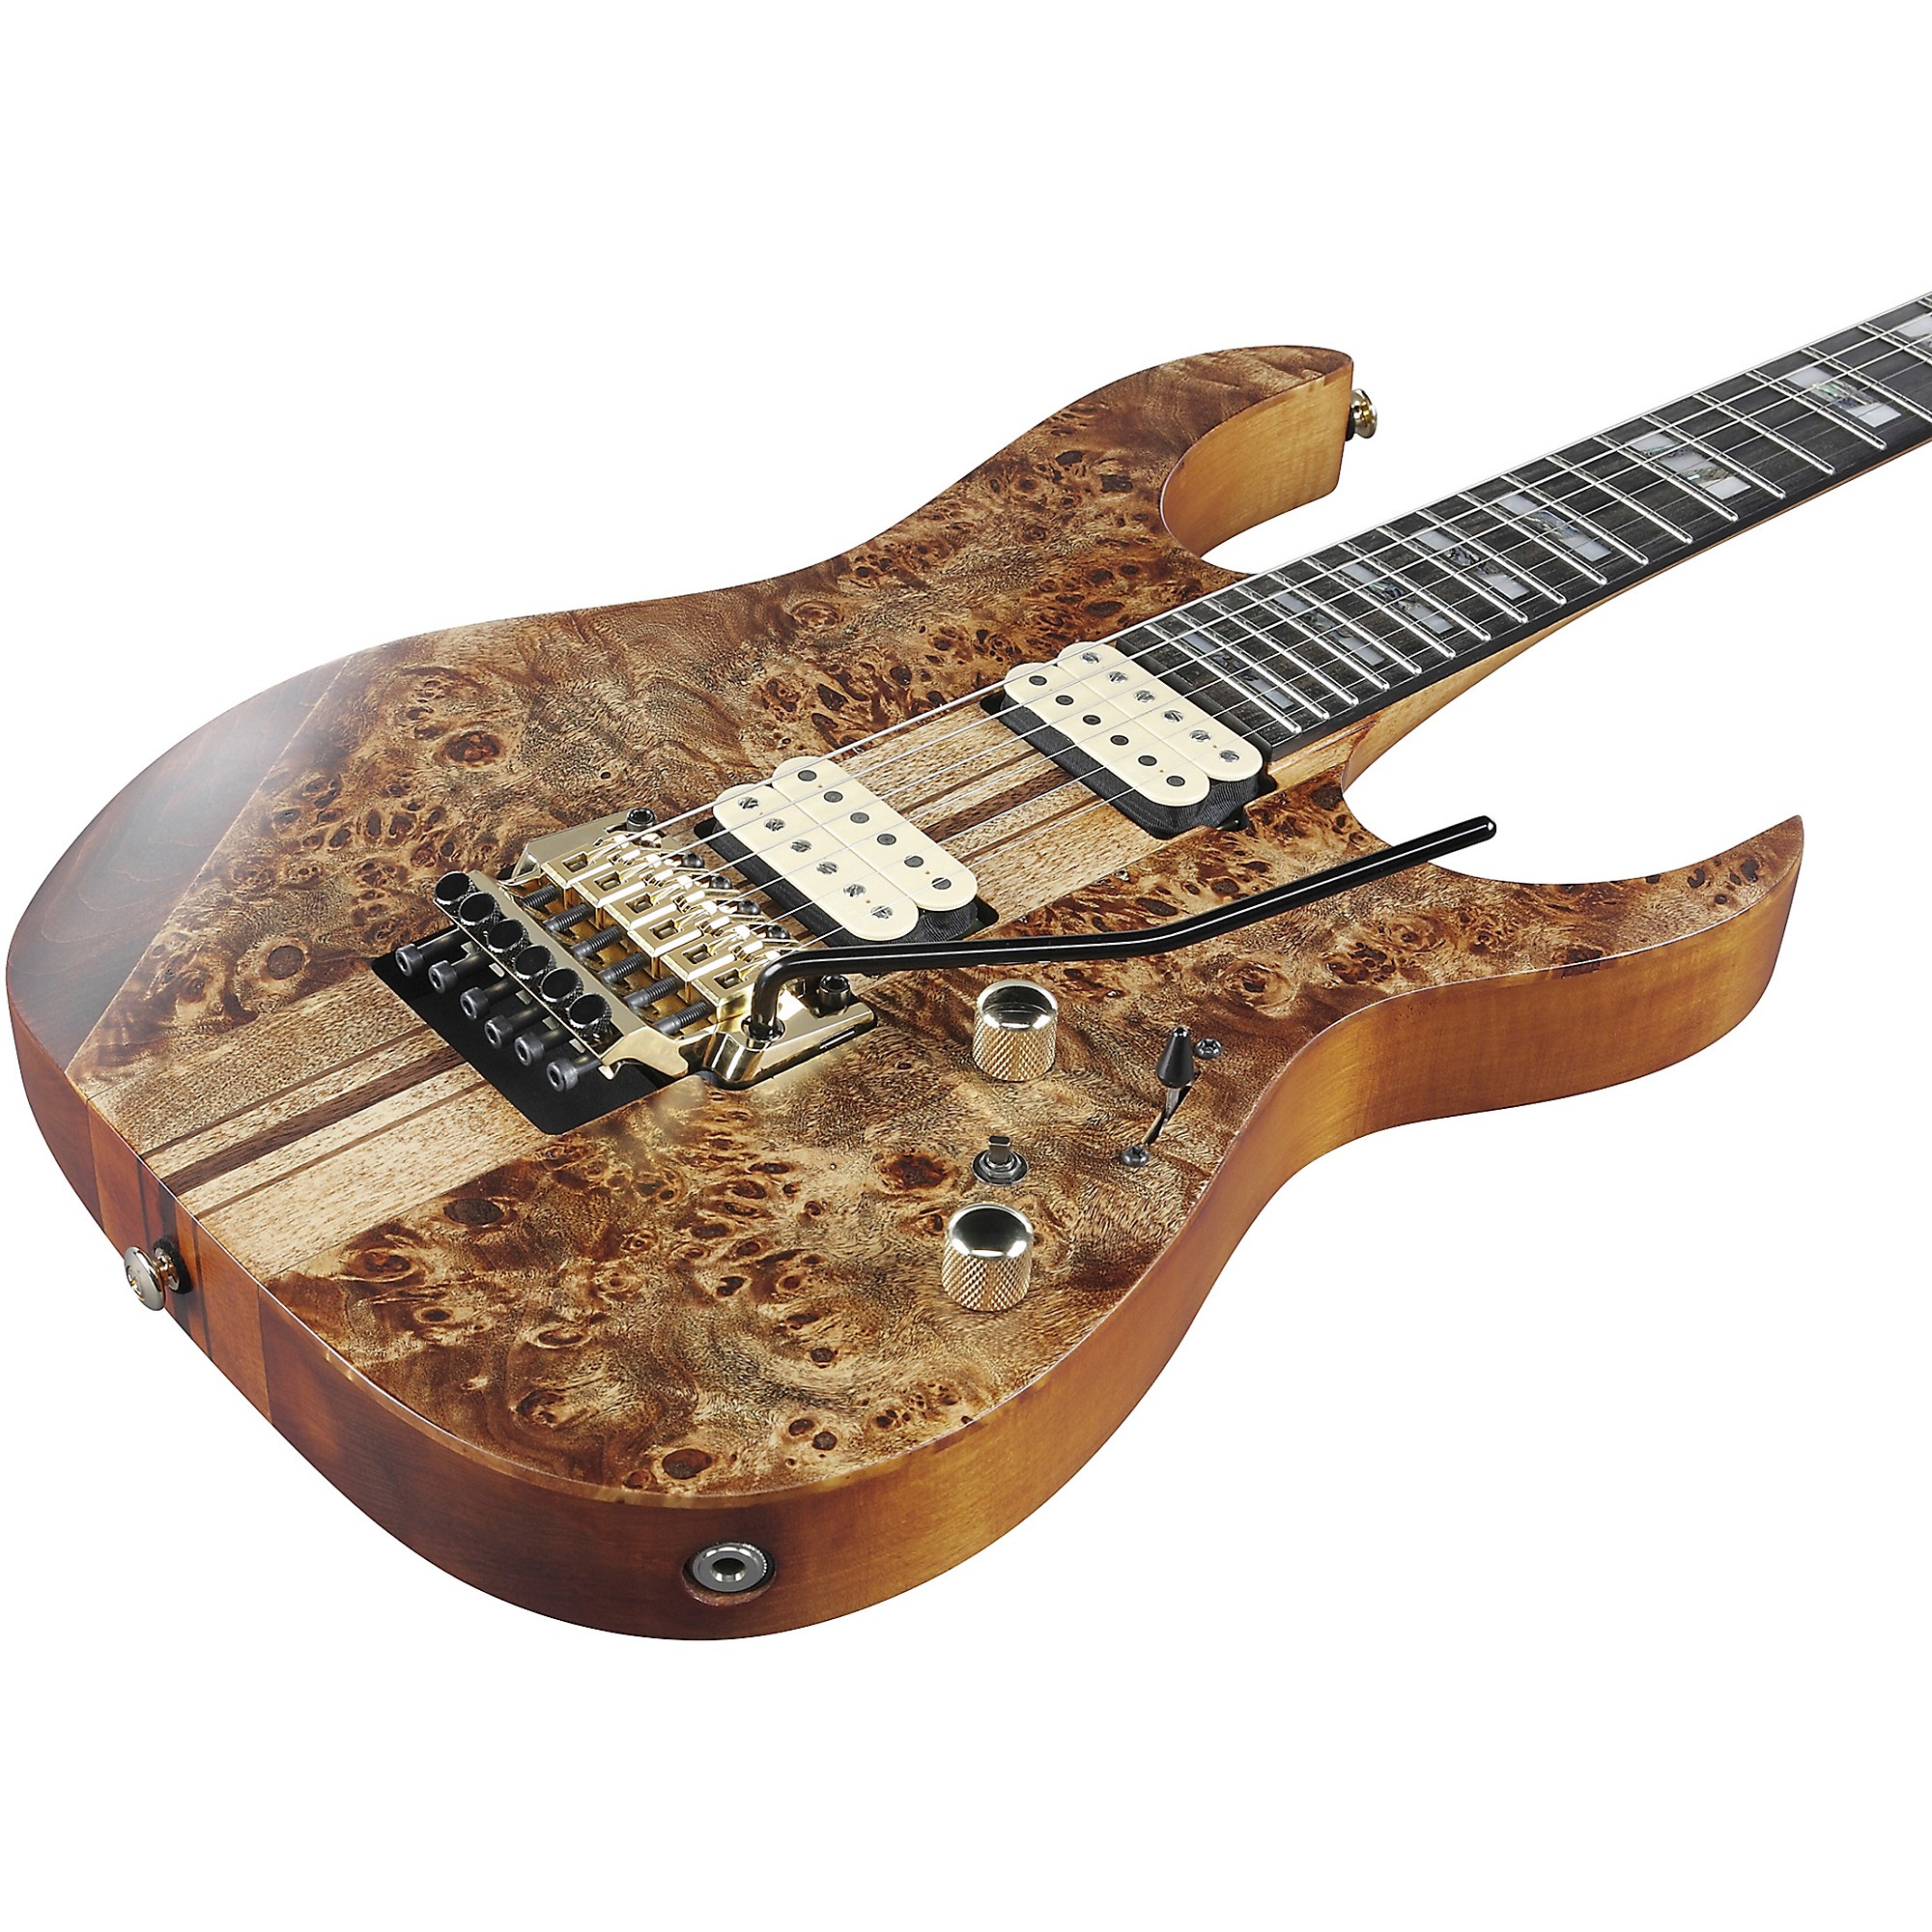 Ibanez RG Premium Electric Guitar Antique Brown Stained Flat | Guitar Center